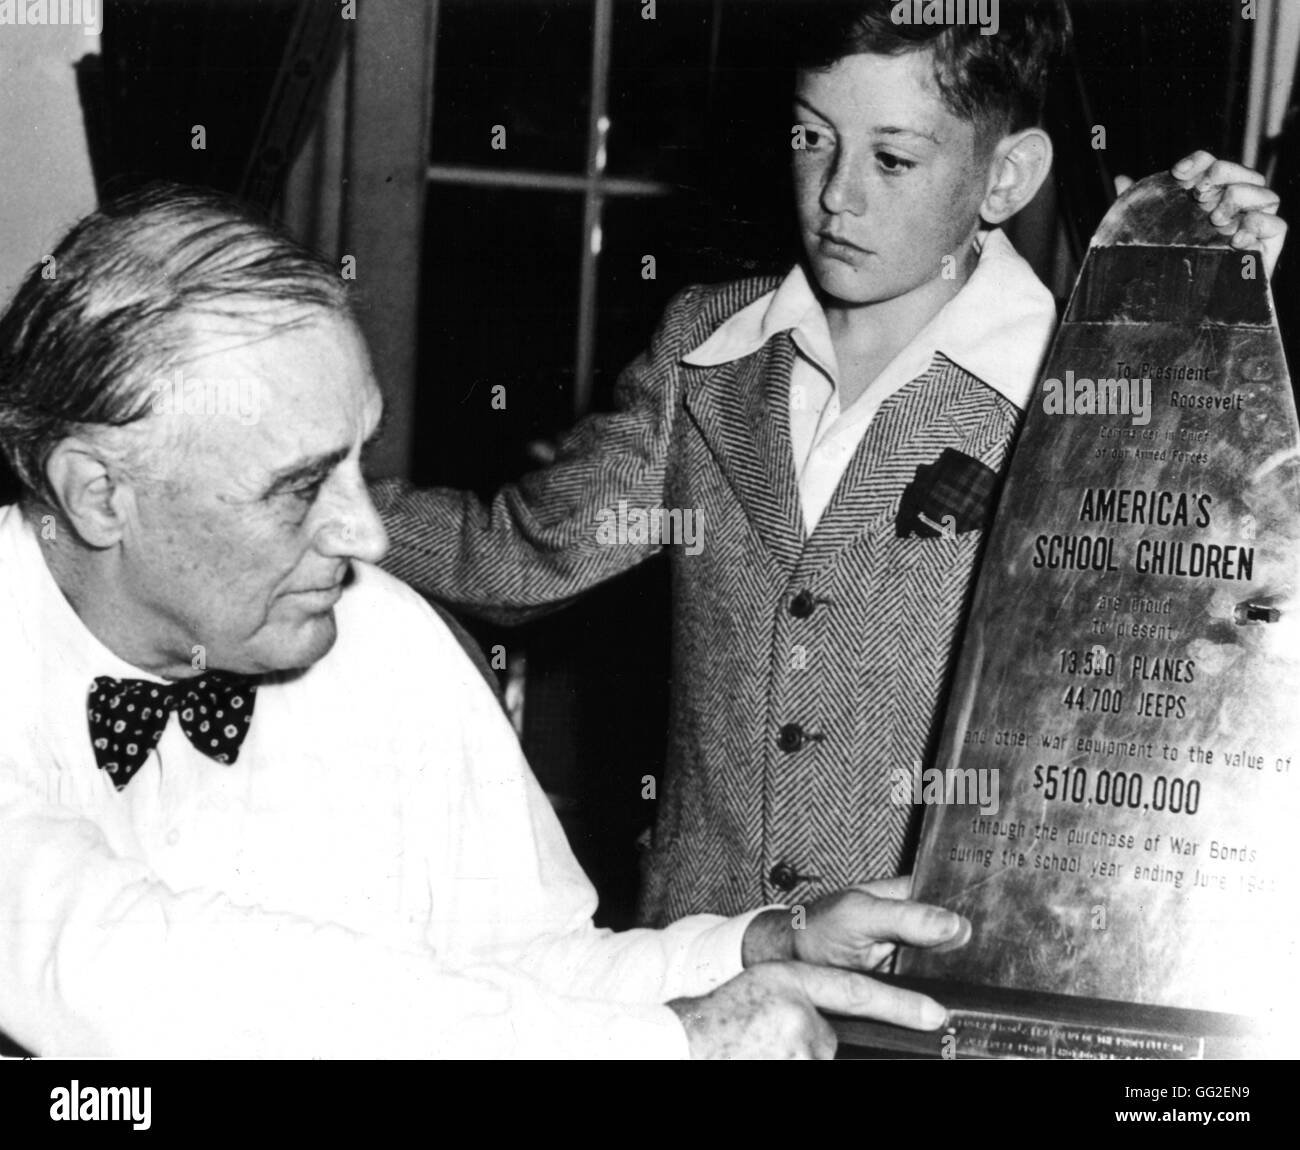 President Roosevelt examining a piece of propeller of a Japanese plane shot down, on which is written the financial participation of school children during the war. The school children's delegate is Donald Buck, aged 13. 1944 United States - World War II Stock Photo